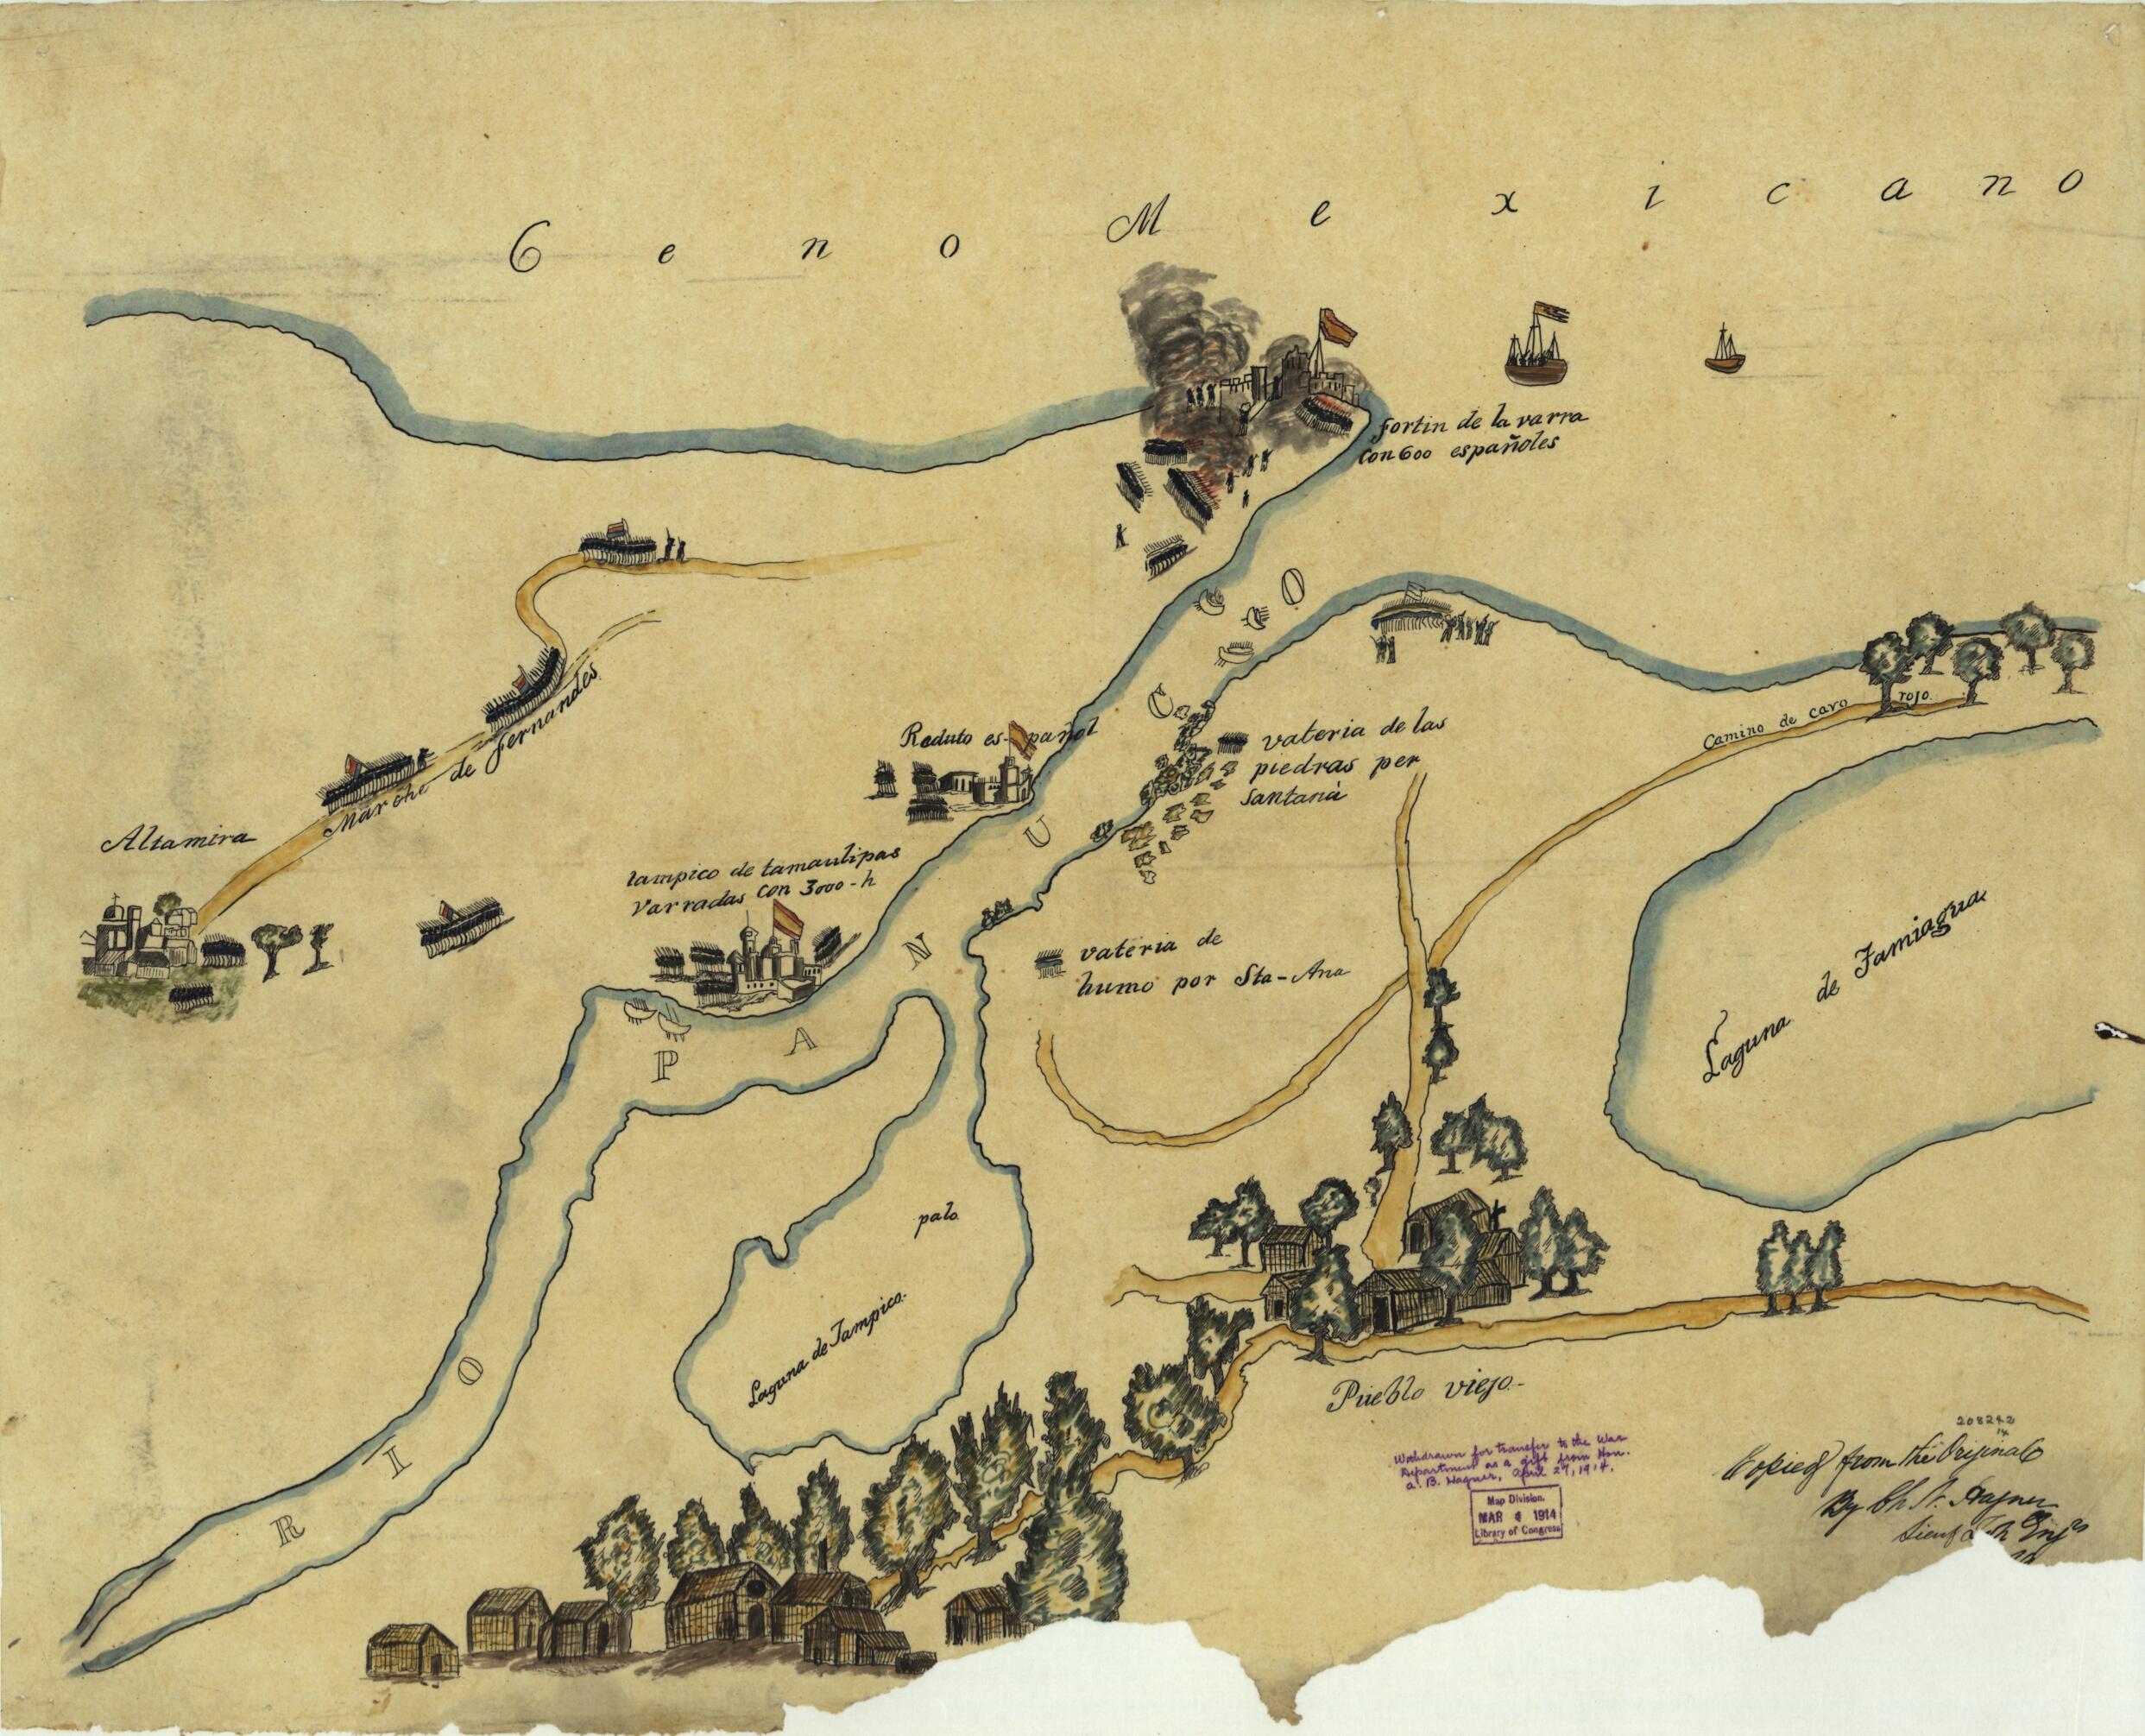 This old map of Map Depicting Battle Against Isidro Barradas In Vicinity of Tampico, Mexico, In 1829 from 1846 was created by Charles N. Hagner in 1846